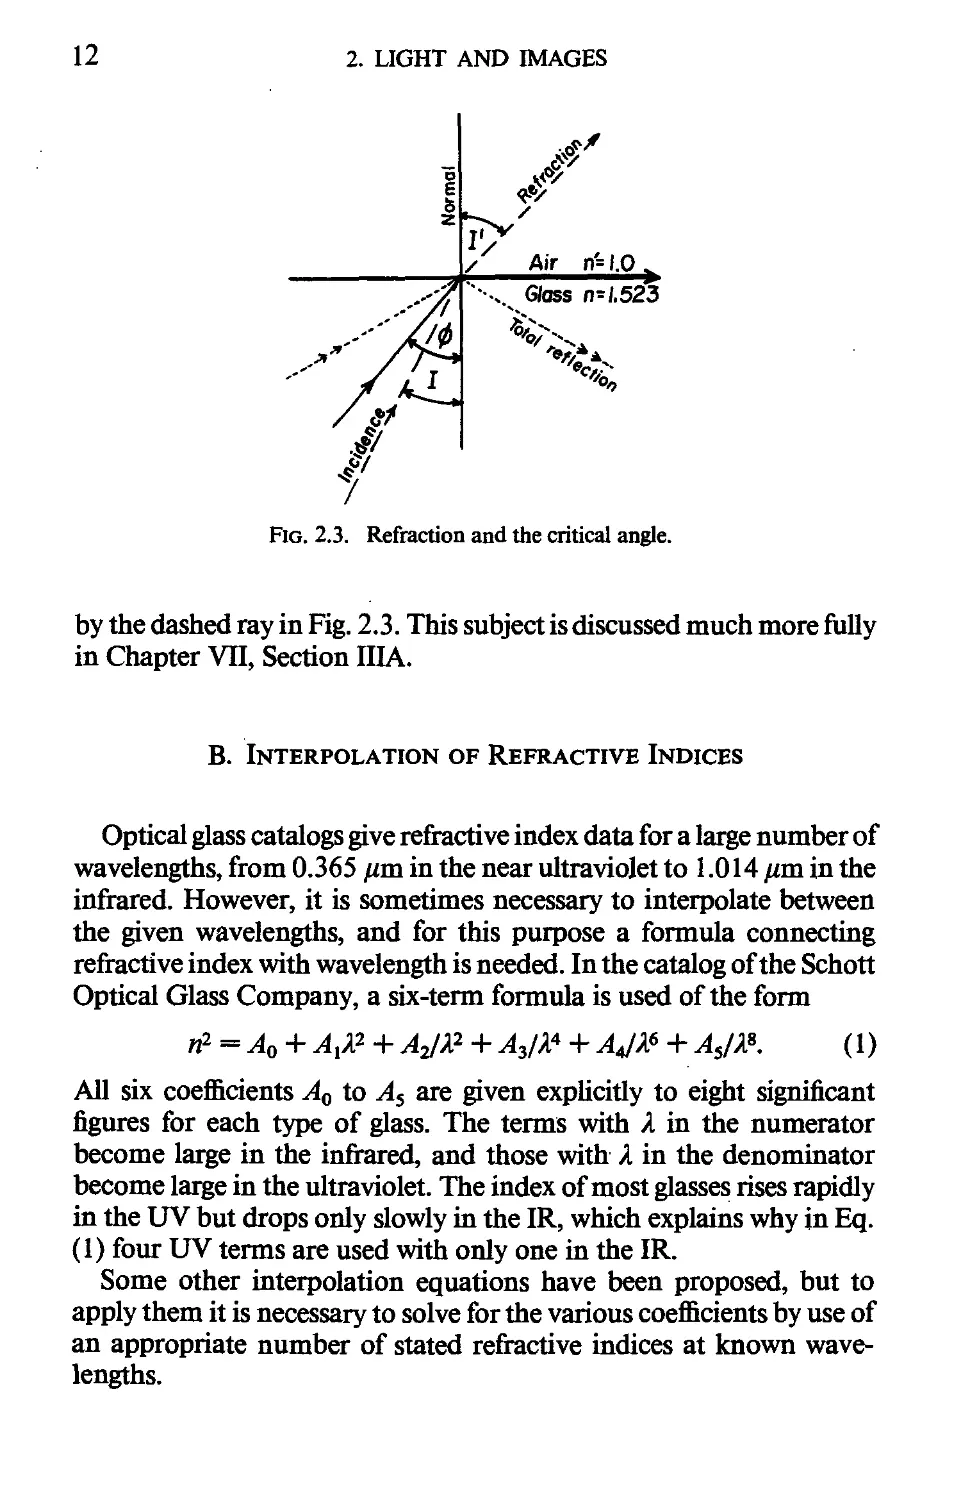 B. Interpolation of Refractive Indices